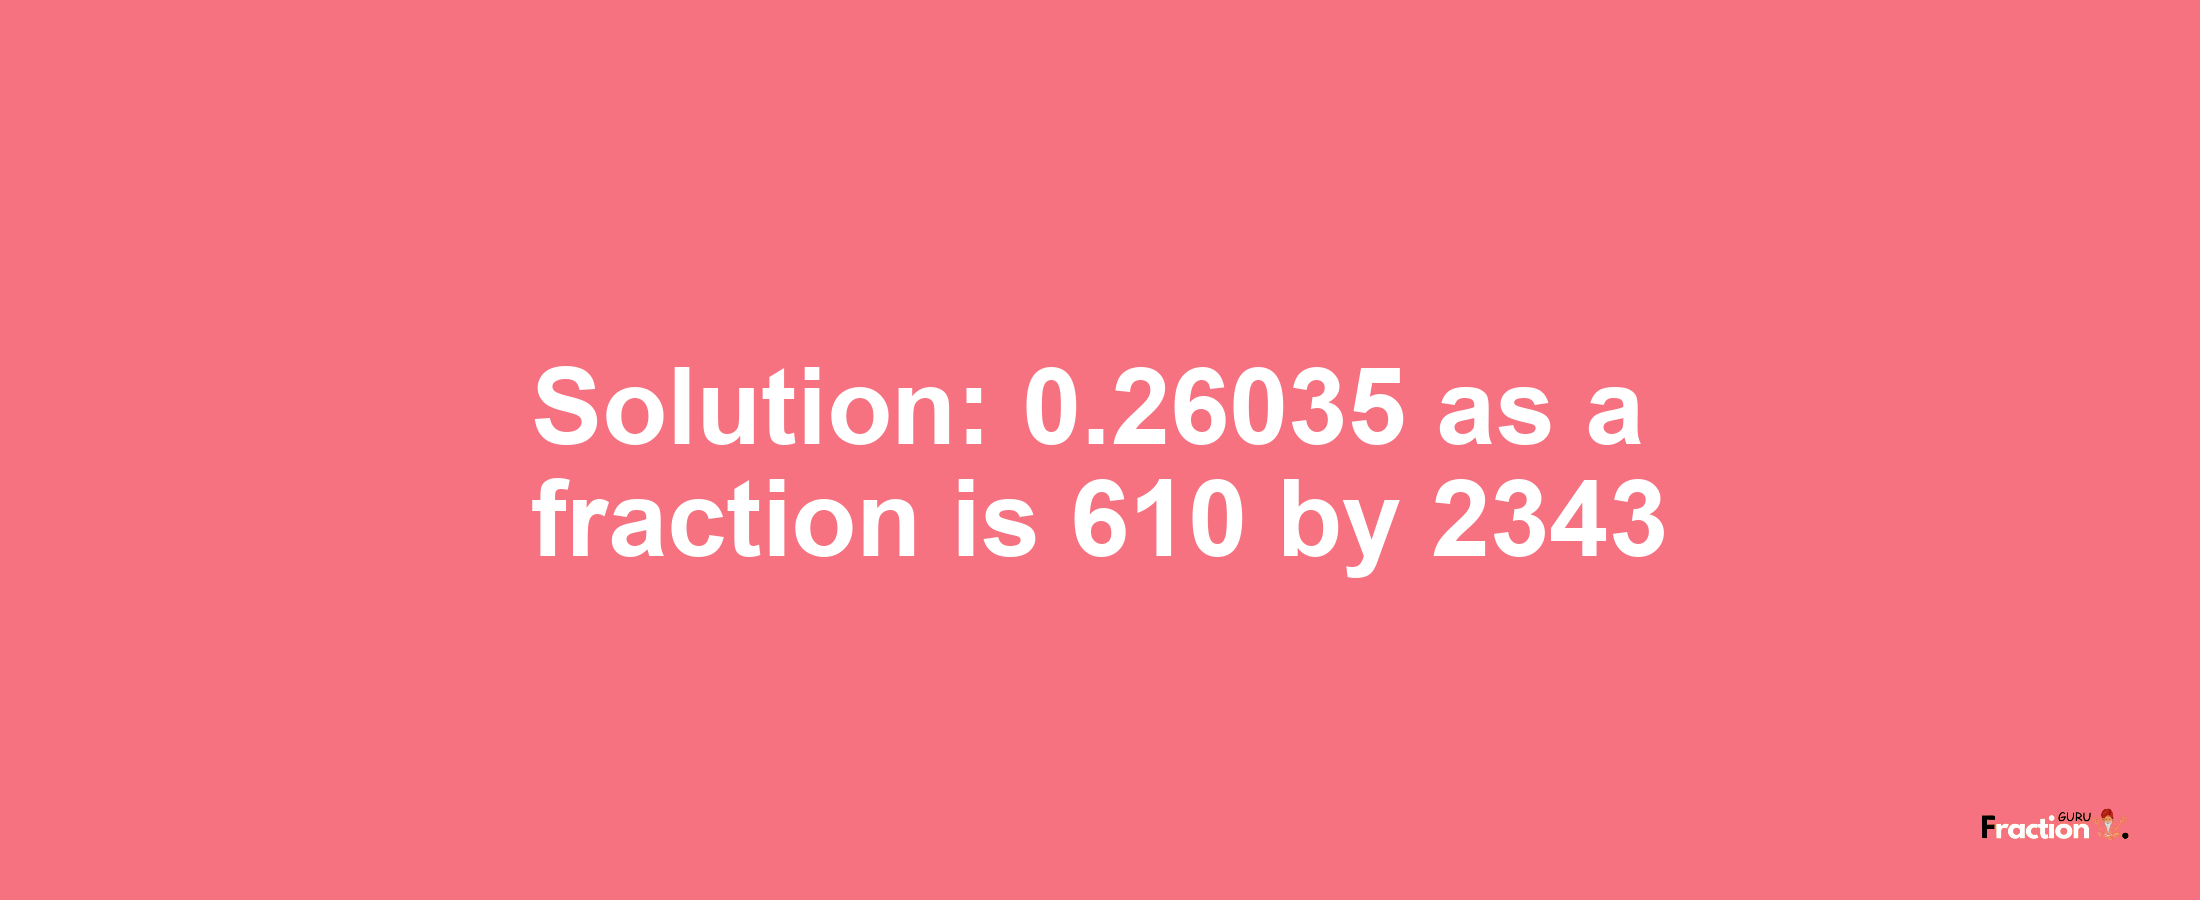 Solution:0.26035 as a fraction is 610/2343